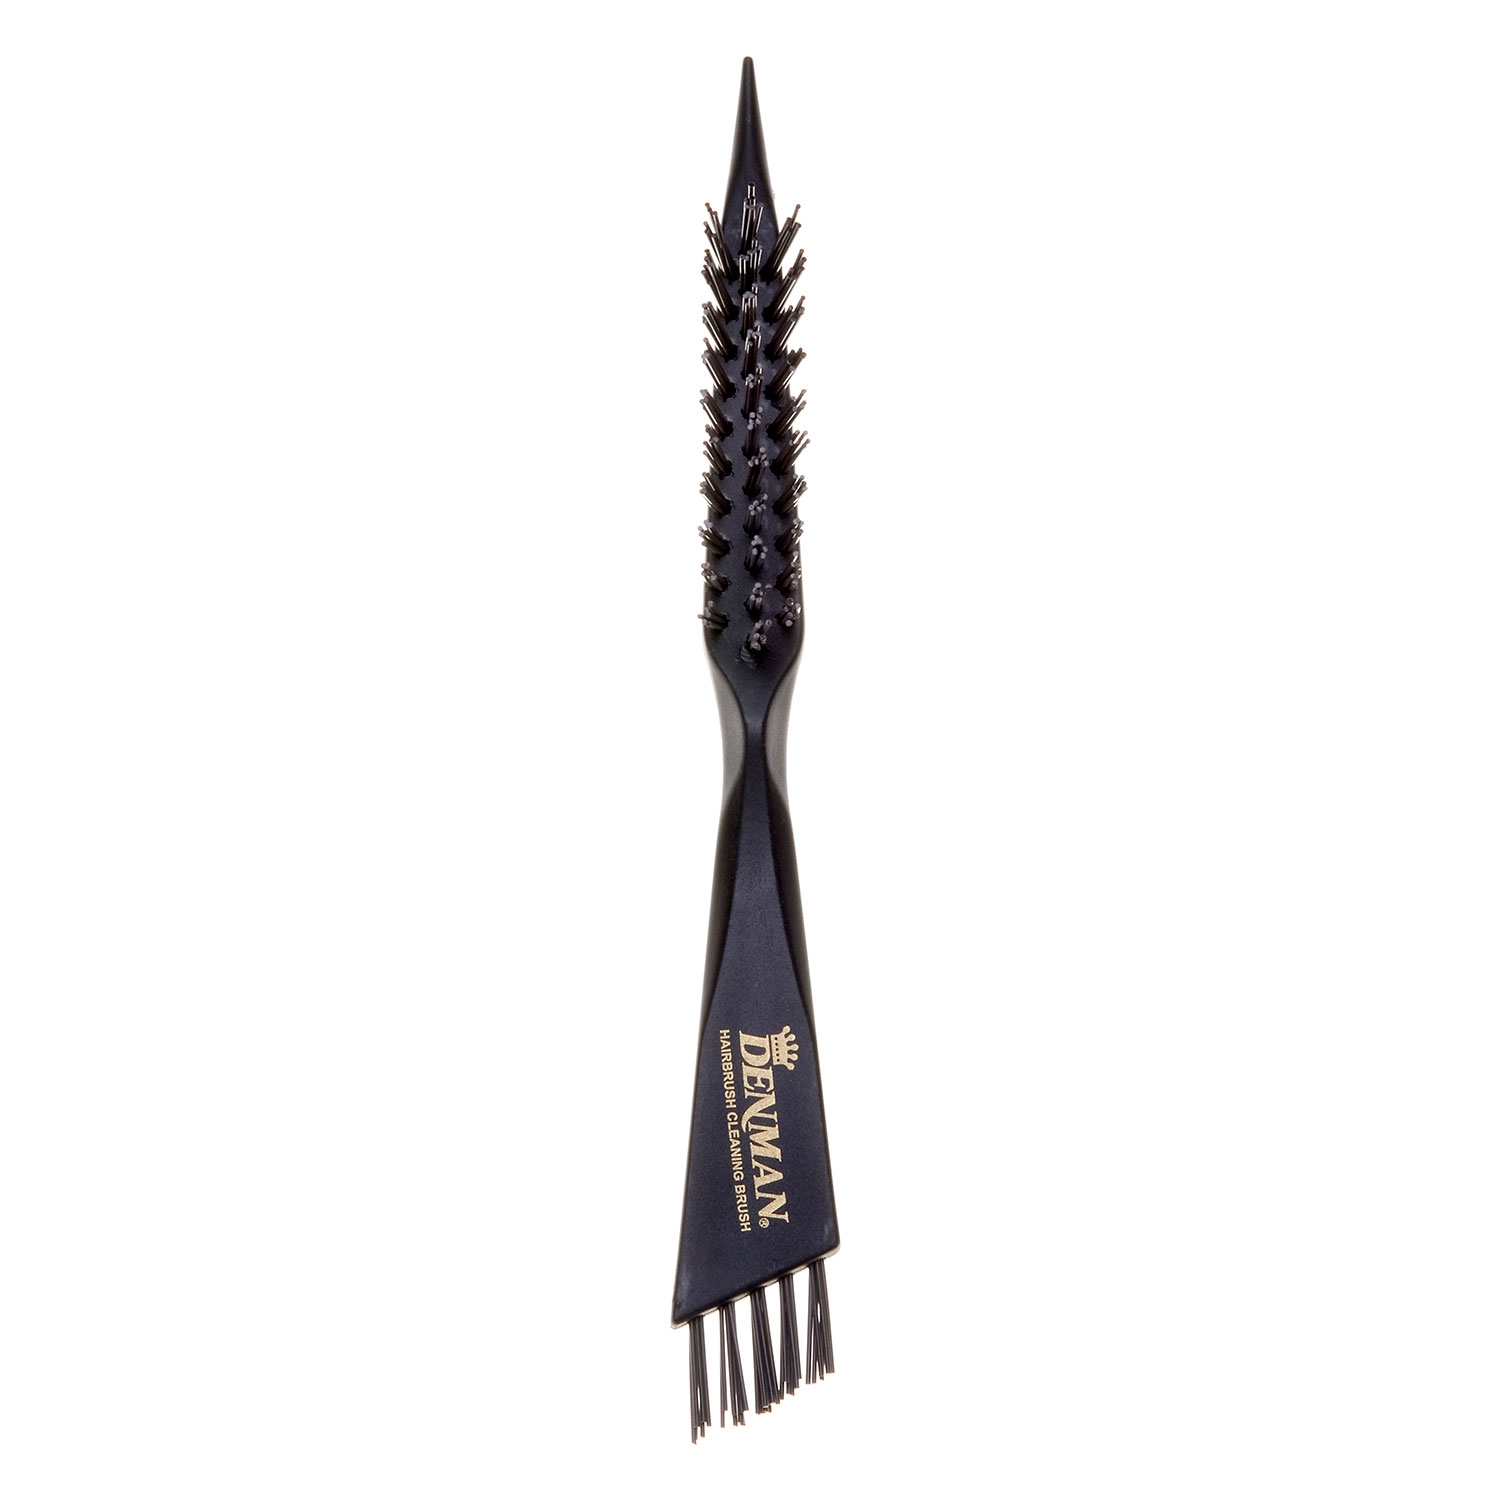 Product image from Denman - Cleaning Brush